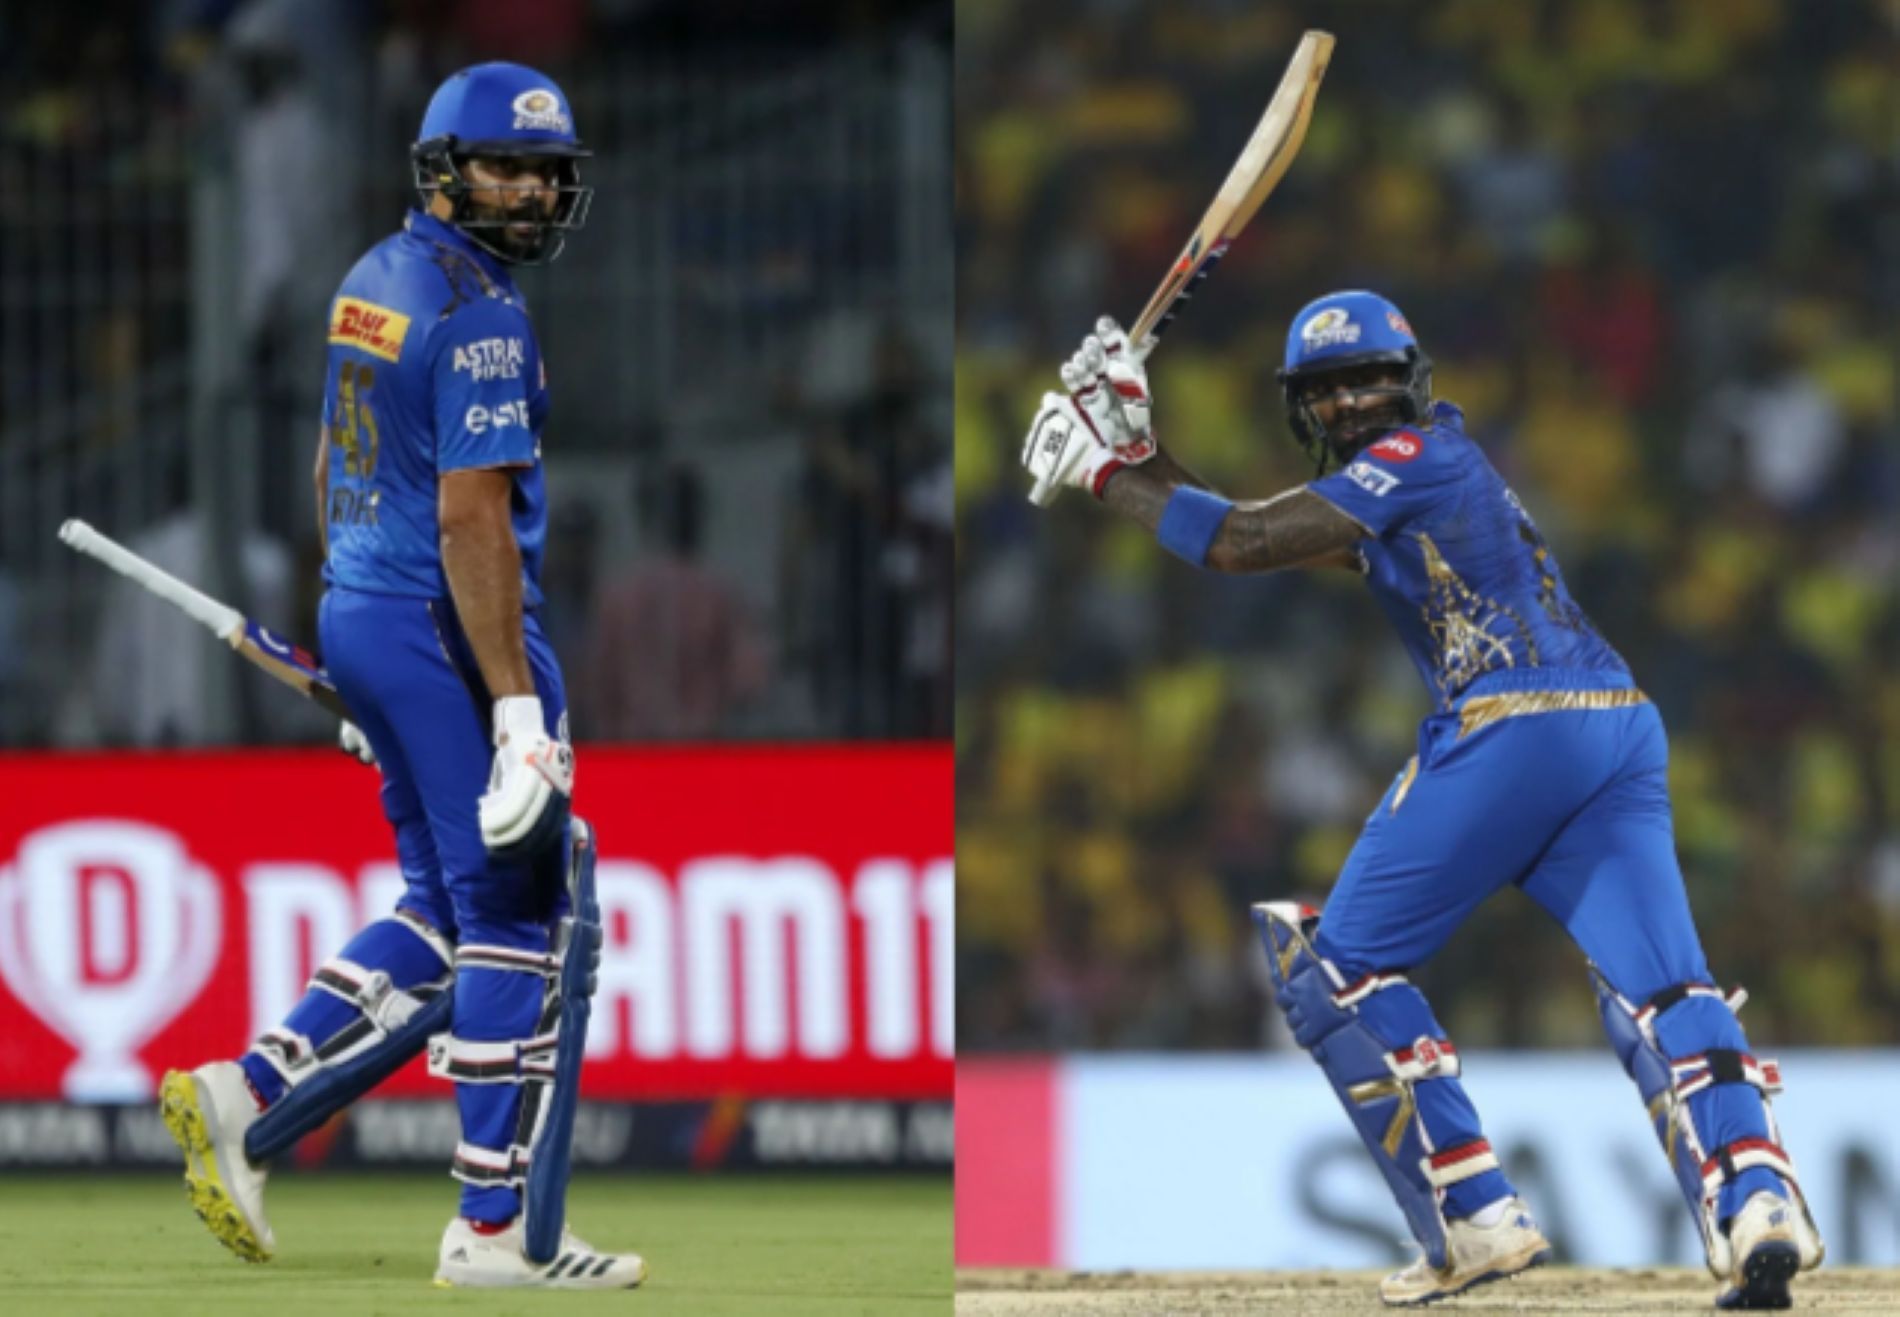 Rohit and SKY scored at less than run-a-ball before their untimely dismissals against KKR